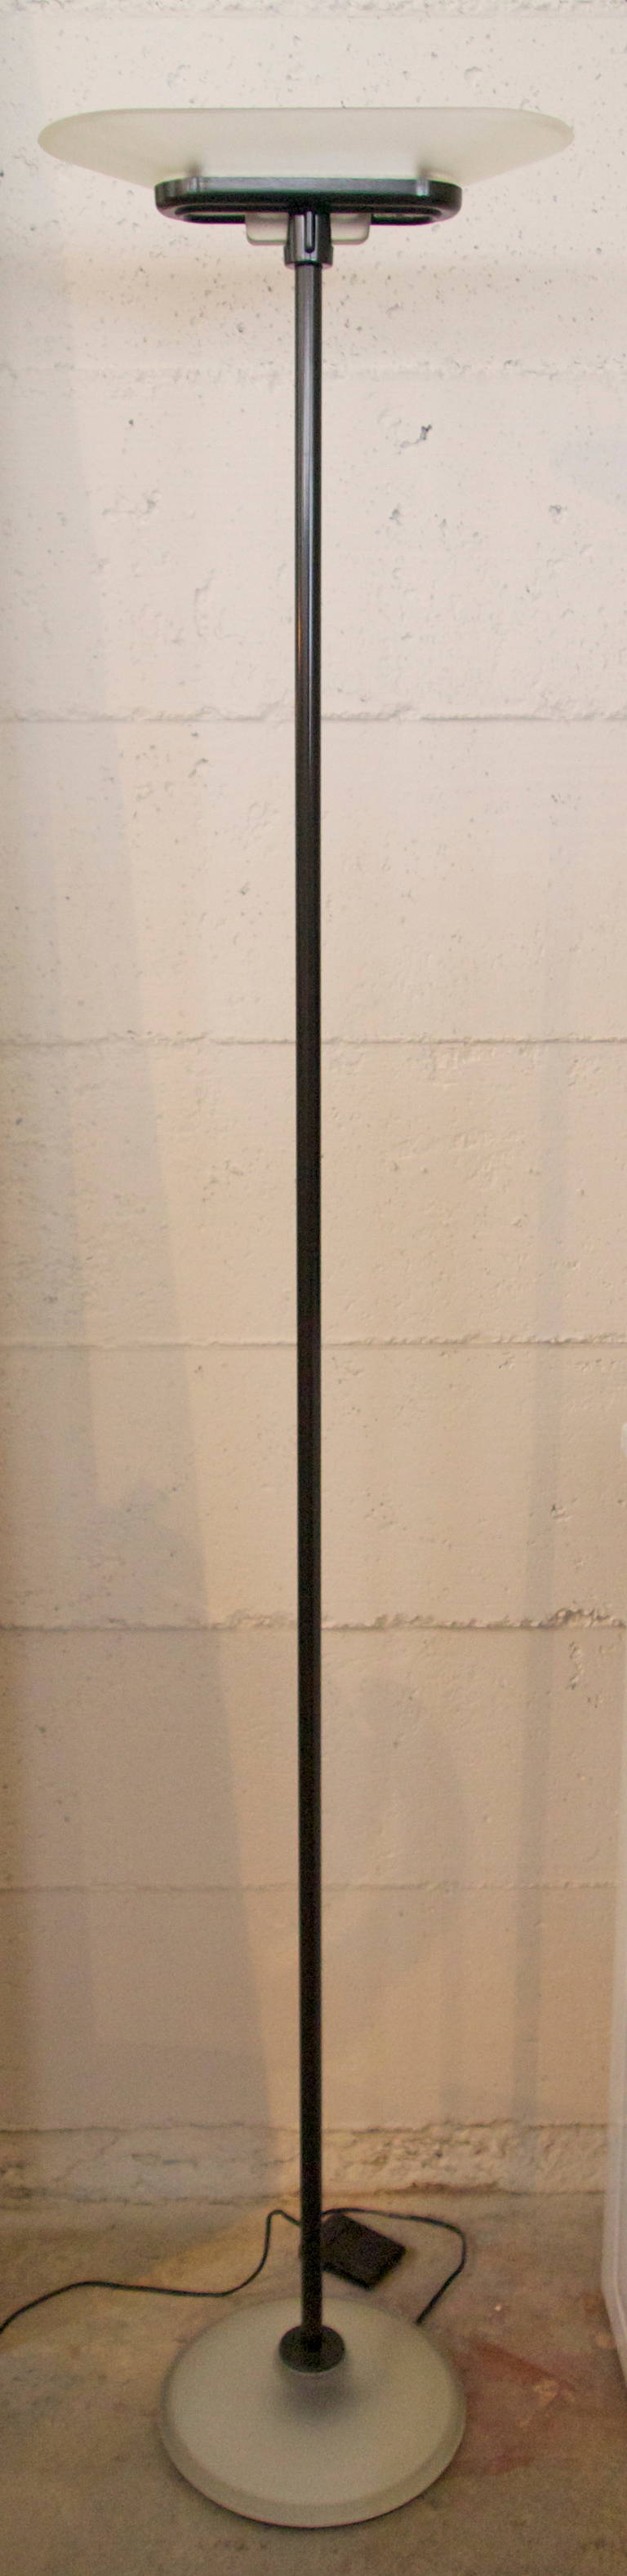 Mid-Century Modern floor lamp or torchere manufactured by Arteluce and designed by King, Miranda and Arnaldi. Circa 1979.